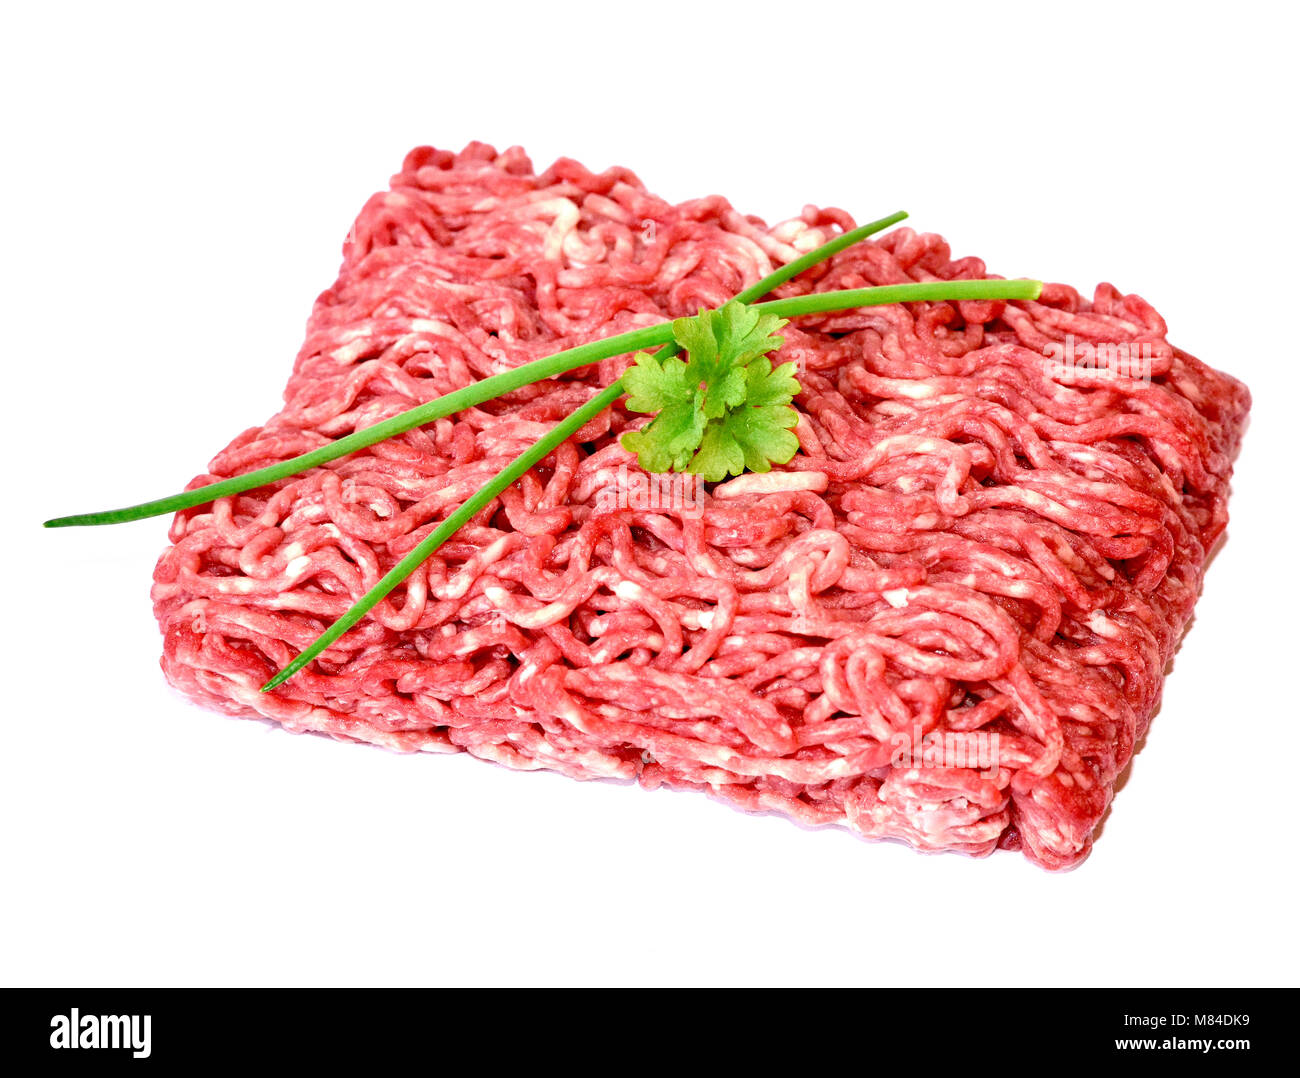 Raw minced meat or beef meat, isolated on white background. Fresh meat, cooking ingredient. high angle view. Stock Photo